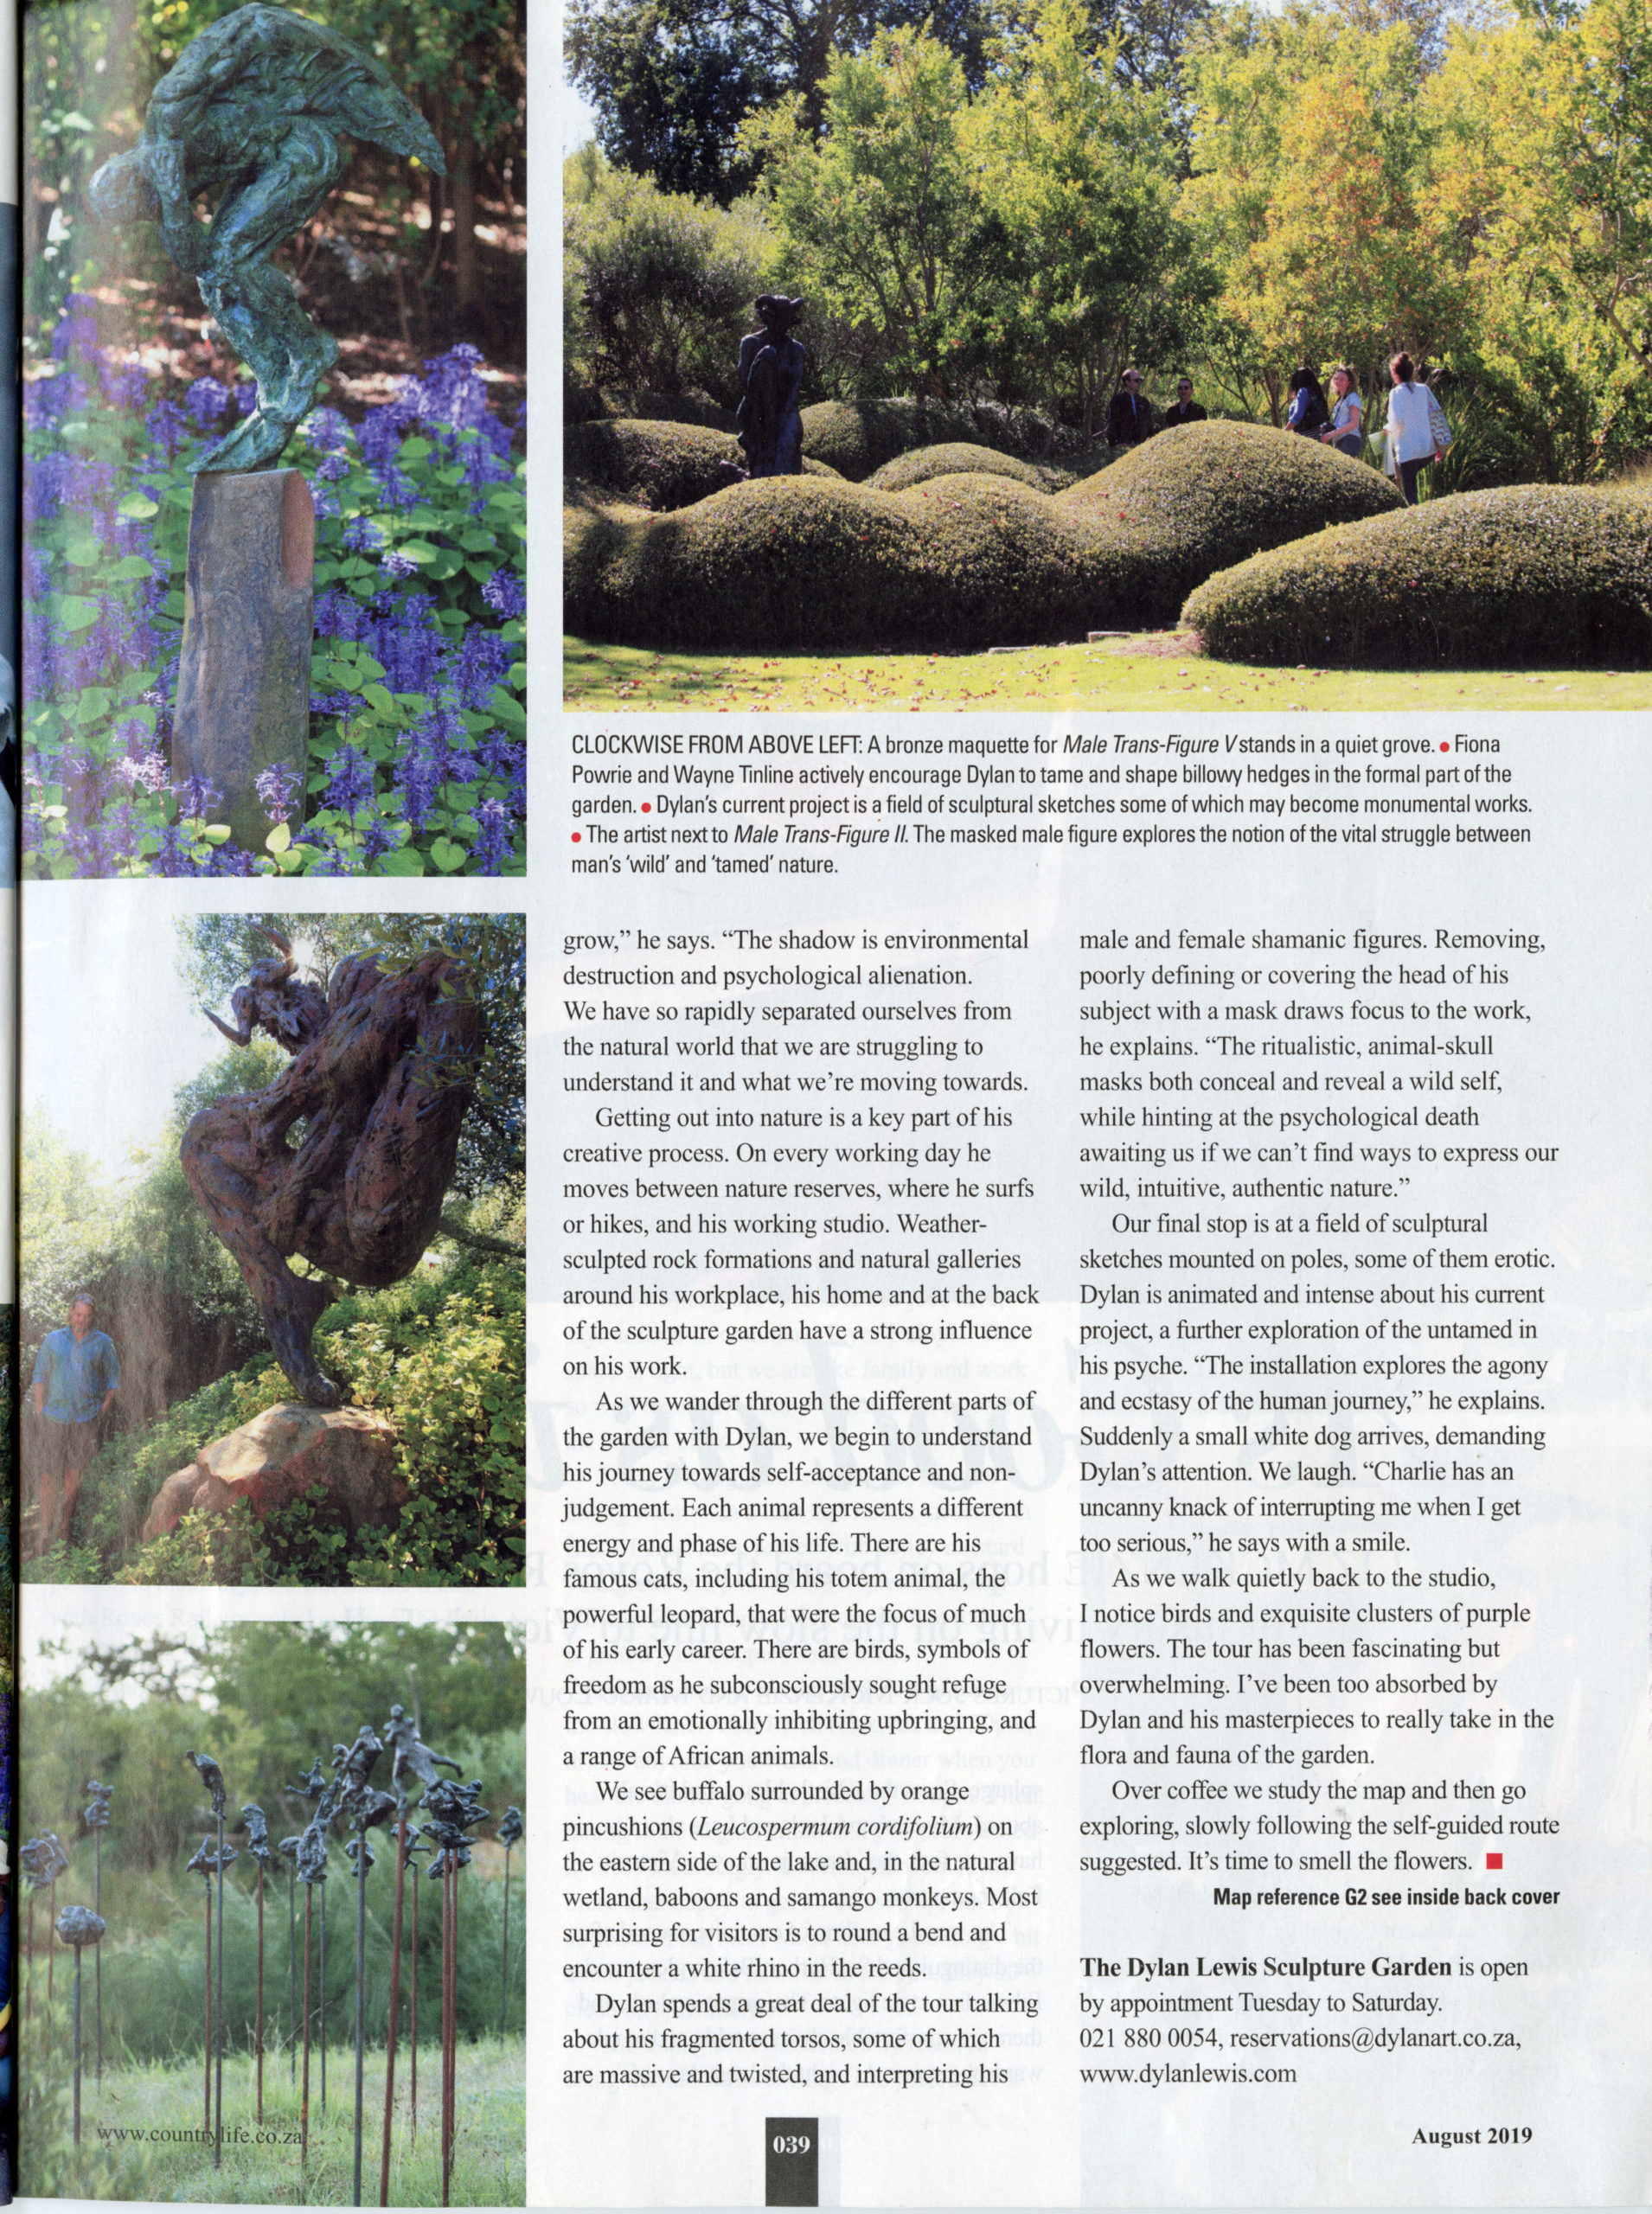 Country Life Aug 2019 pg 39